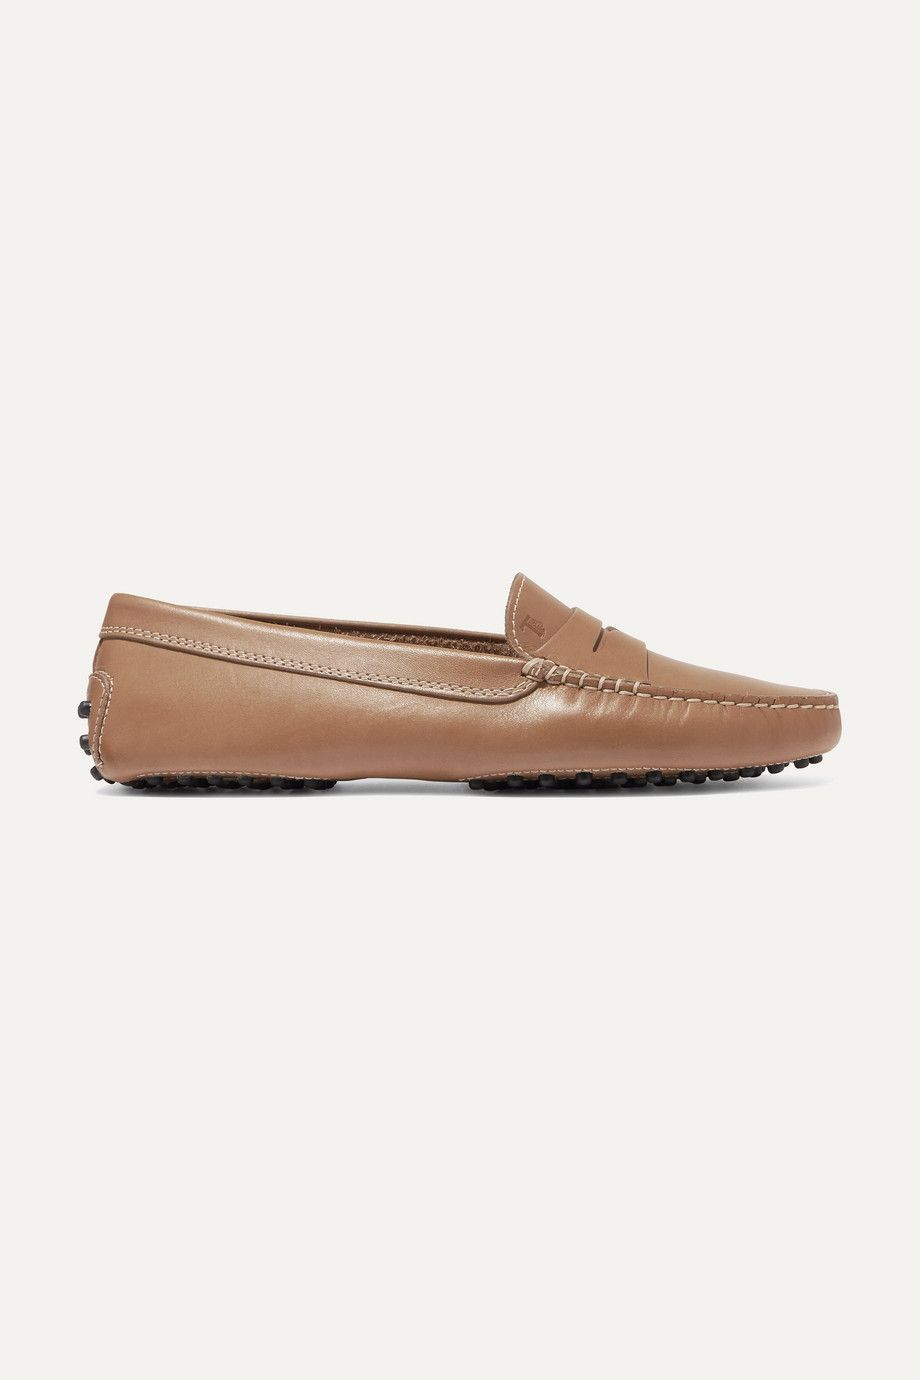 best womens loafers uk